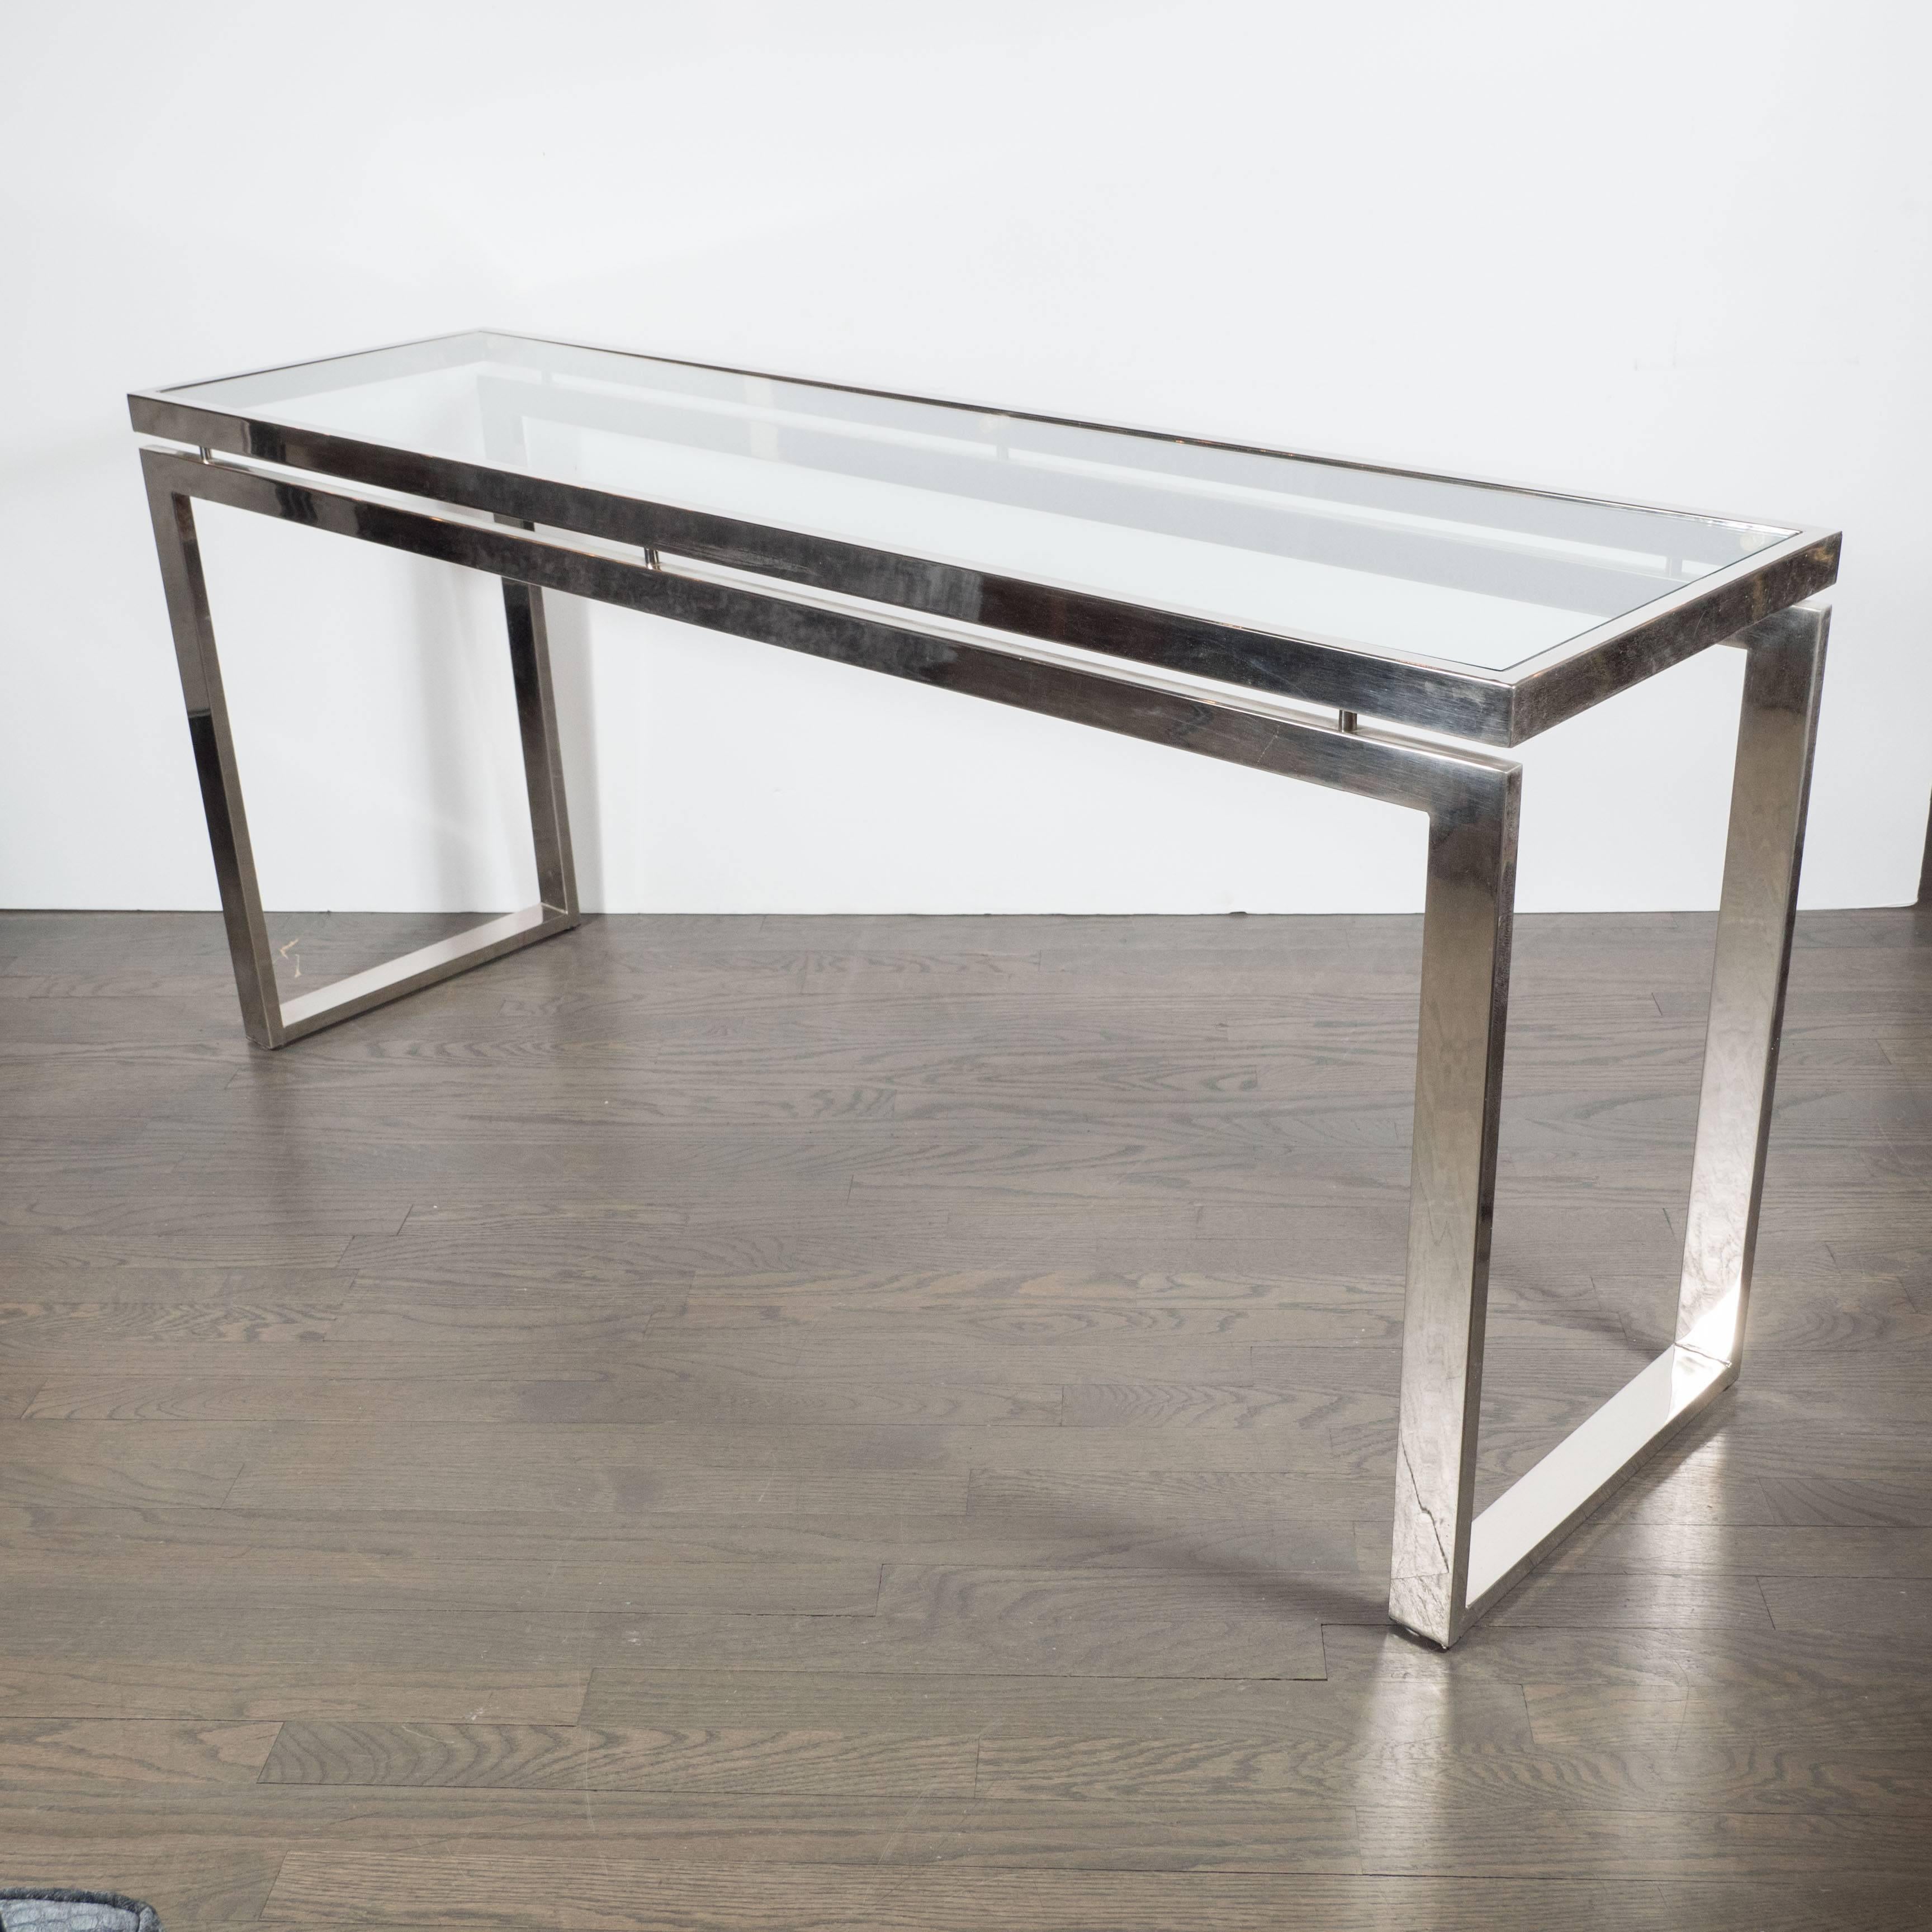 This very sleek Mid-Century Modernist chrome and glass console or sofa table features a sleek and stylized chrome base that supports a glass top. The rectangular glass top has a chrome surround resting on chrome supports giving the piece a light and